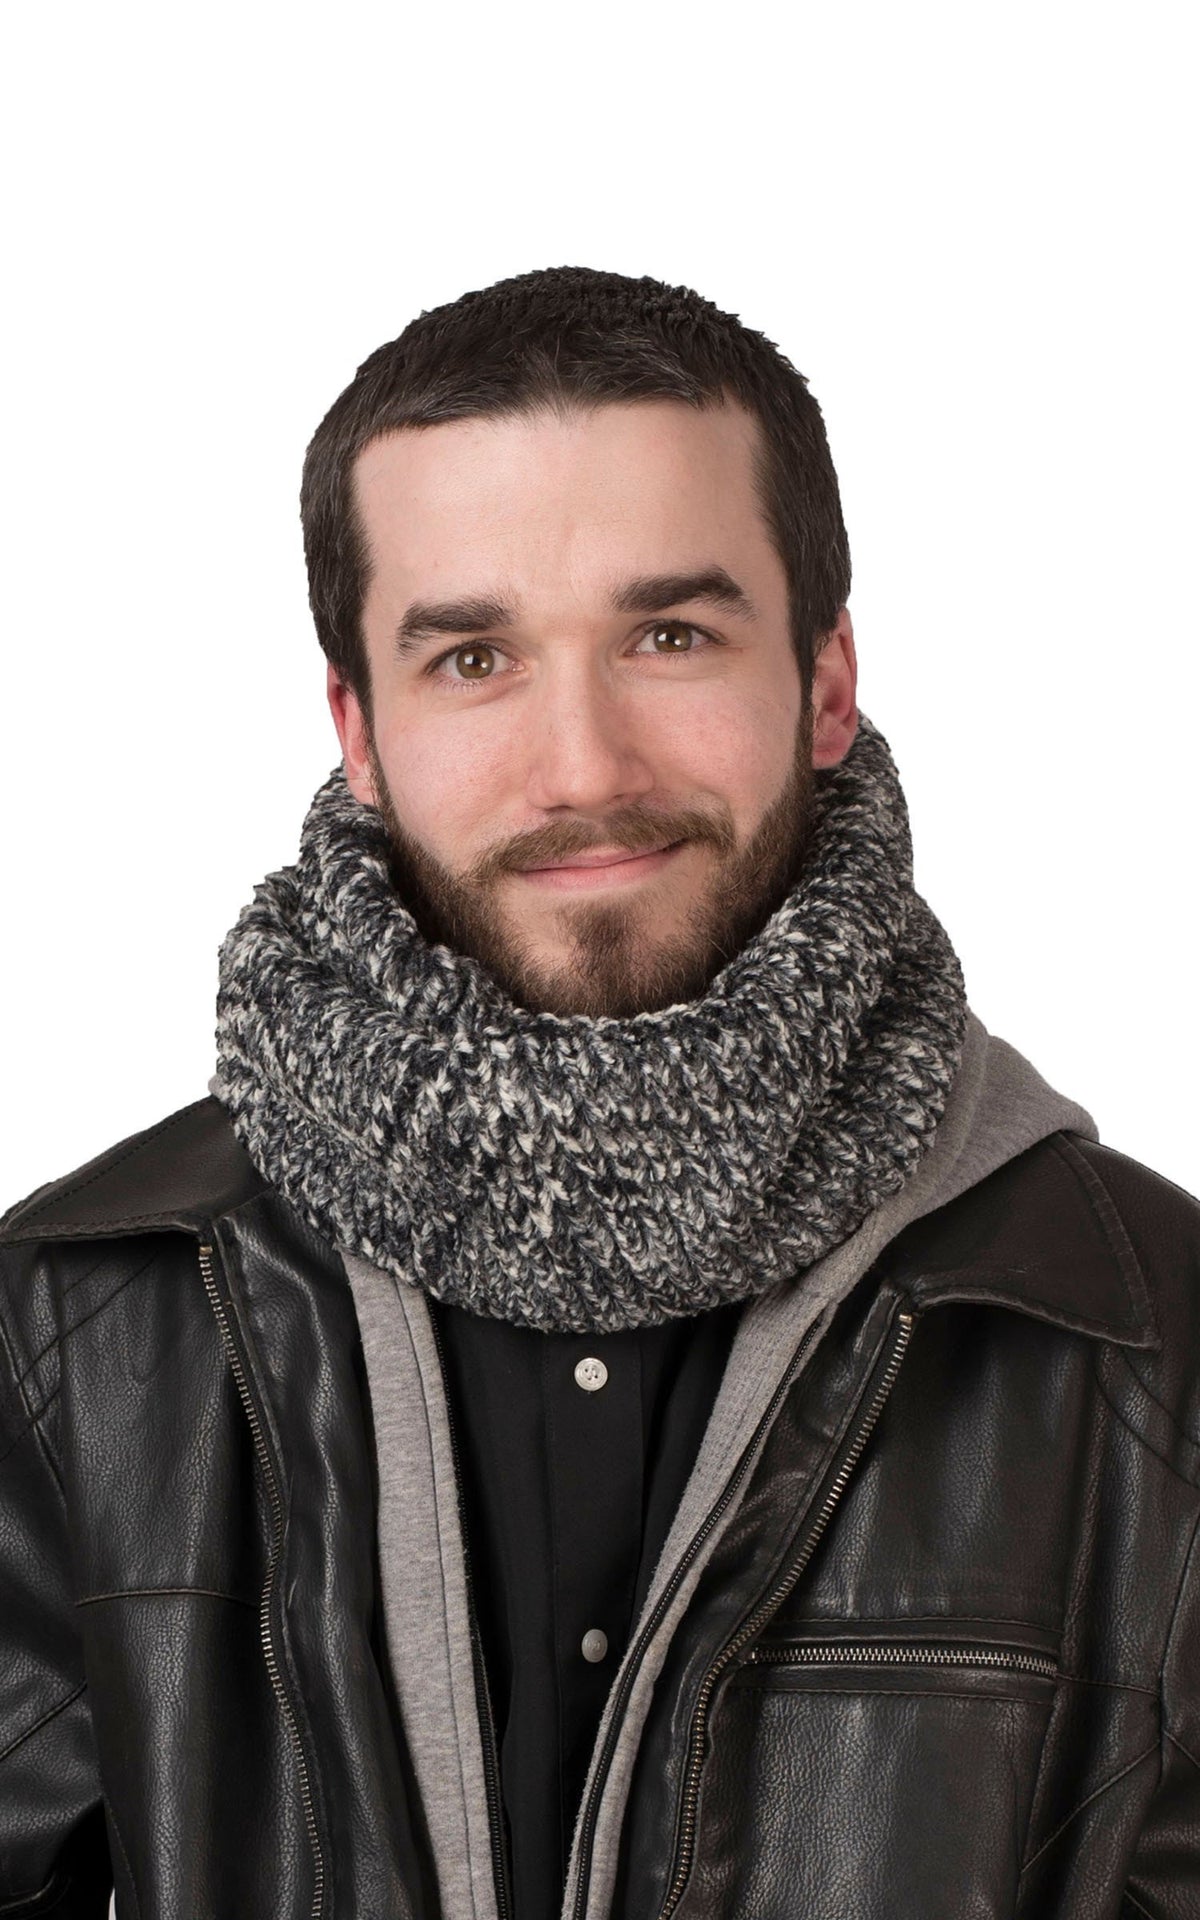 Smiling modeling wearing a  Neck Warmer For men  | Cozy Cable Black and White Faux Fur | Handmade in the USA by Pandemonium Seattl